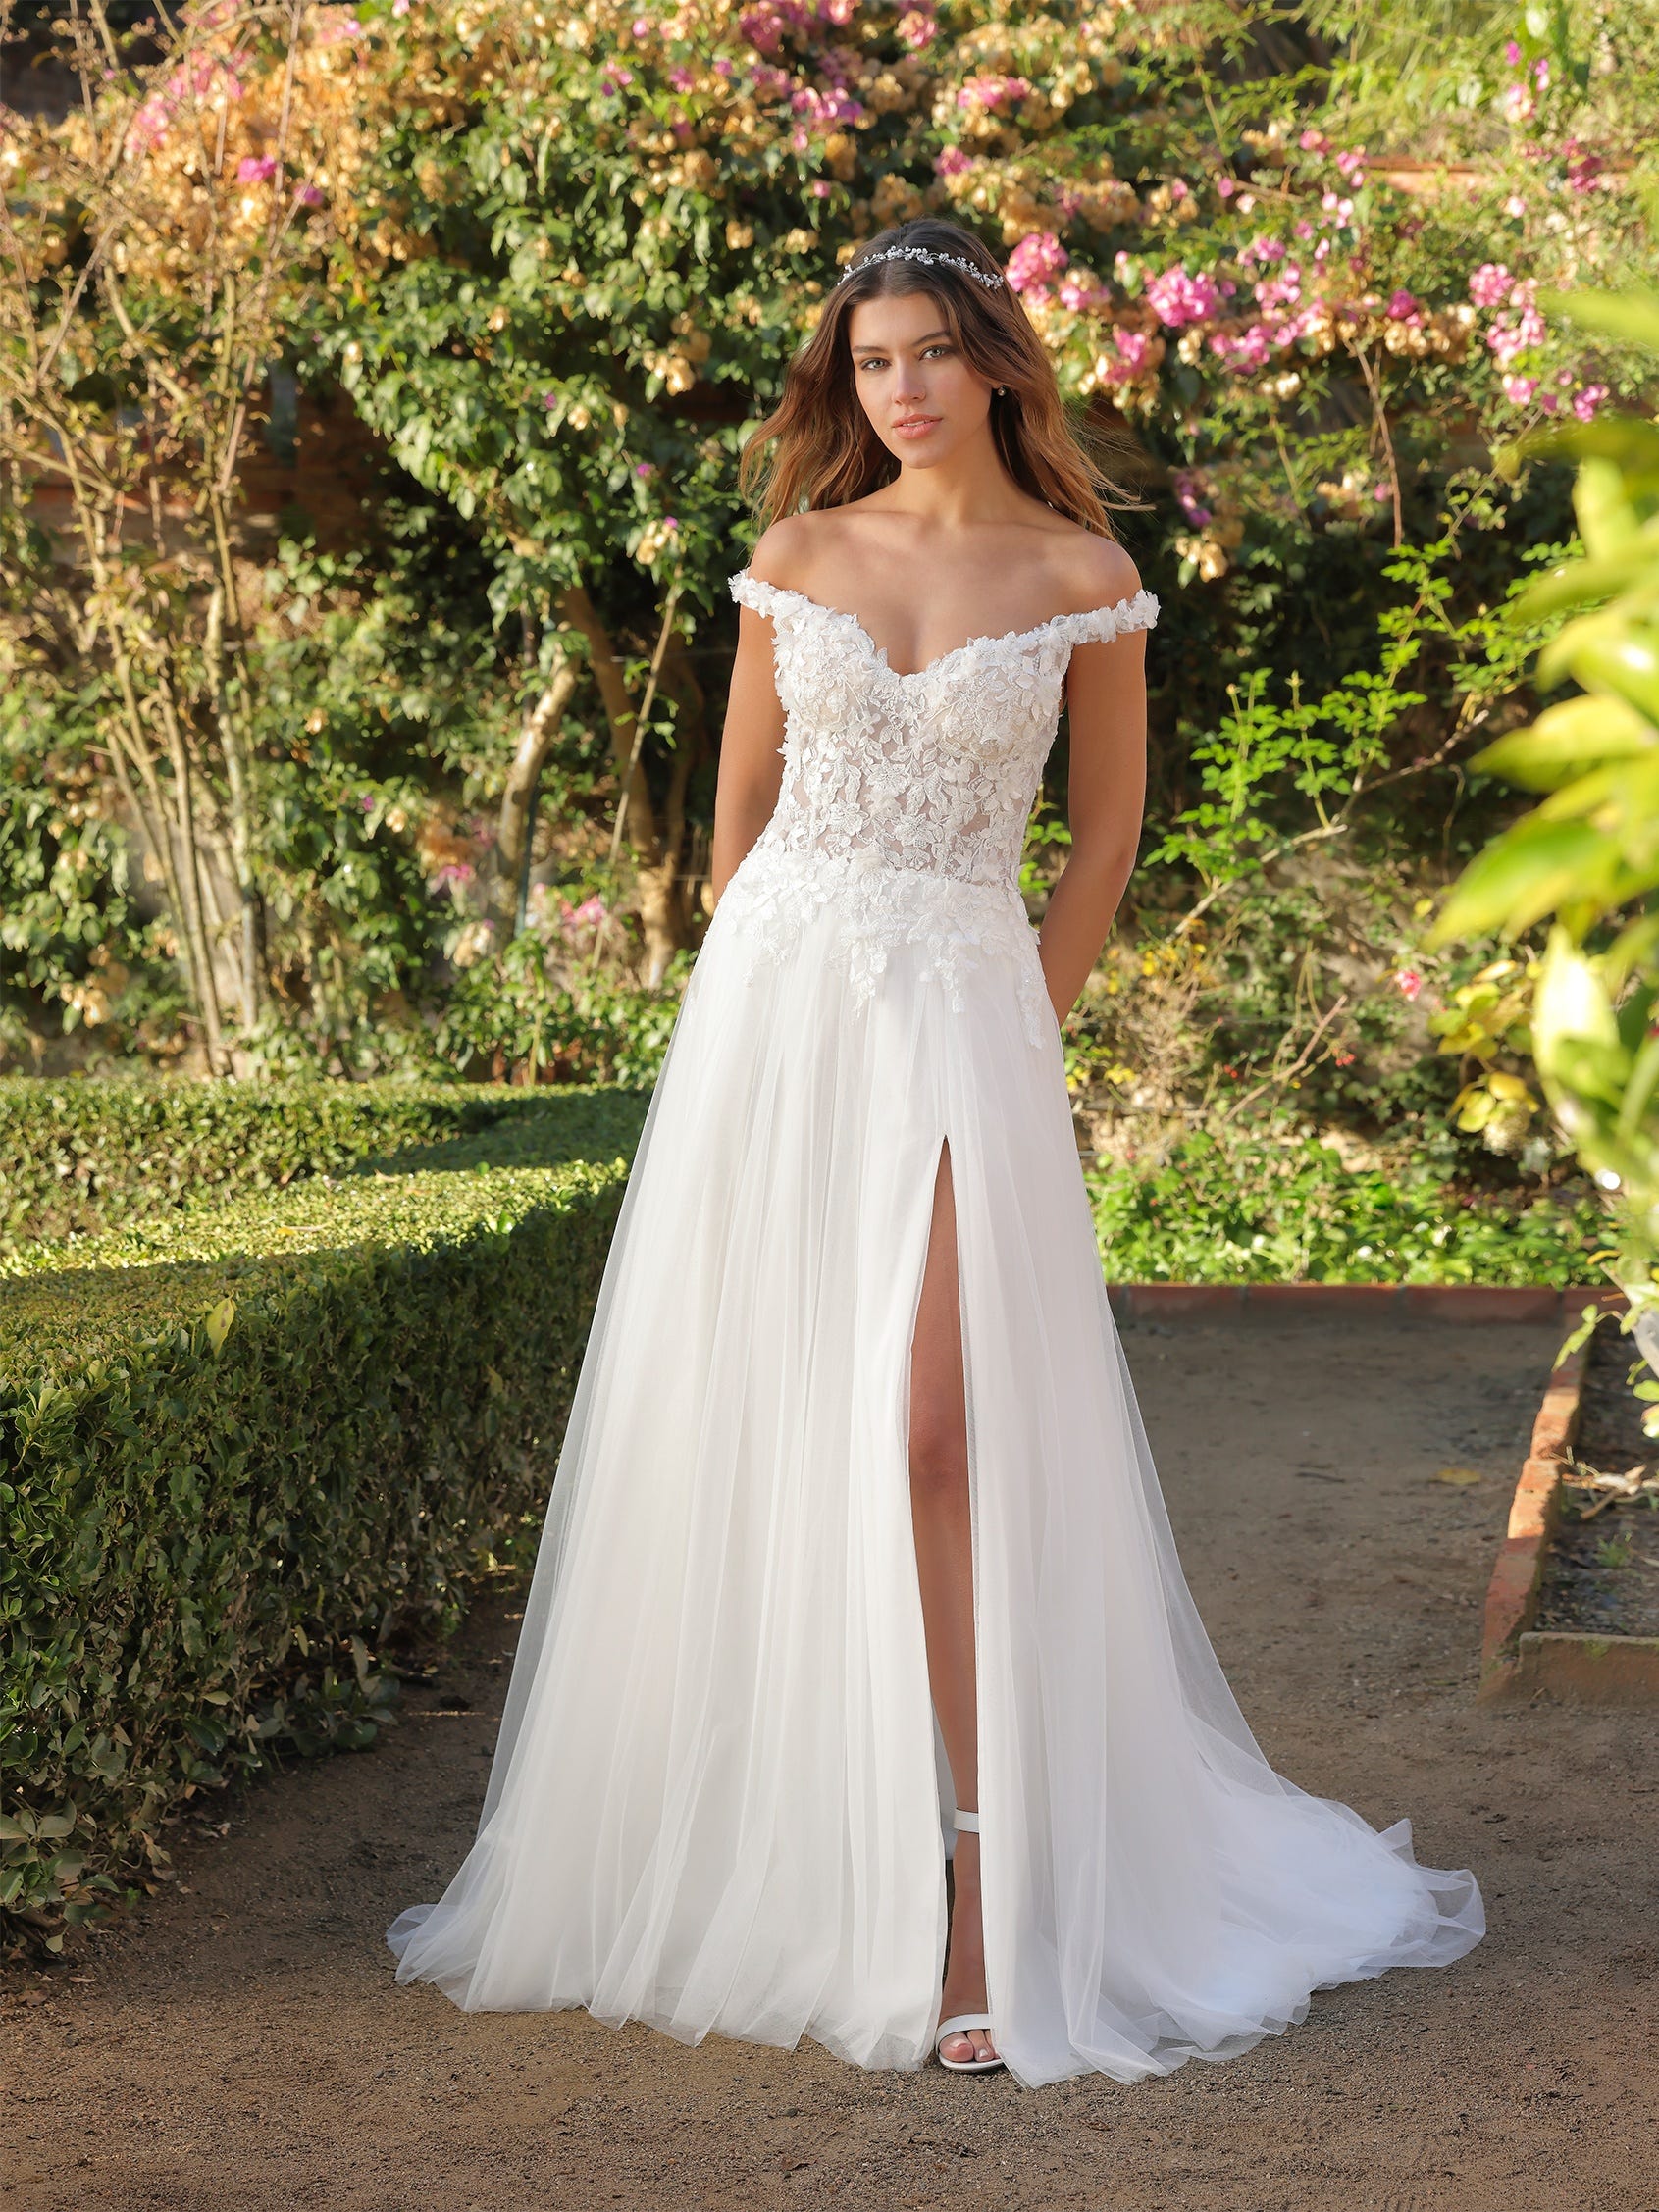 Corset Wedding Dresses from Darius Bridal collection